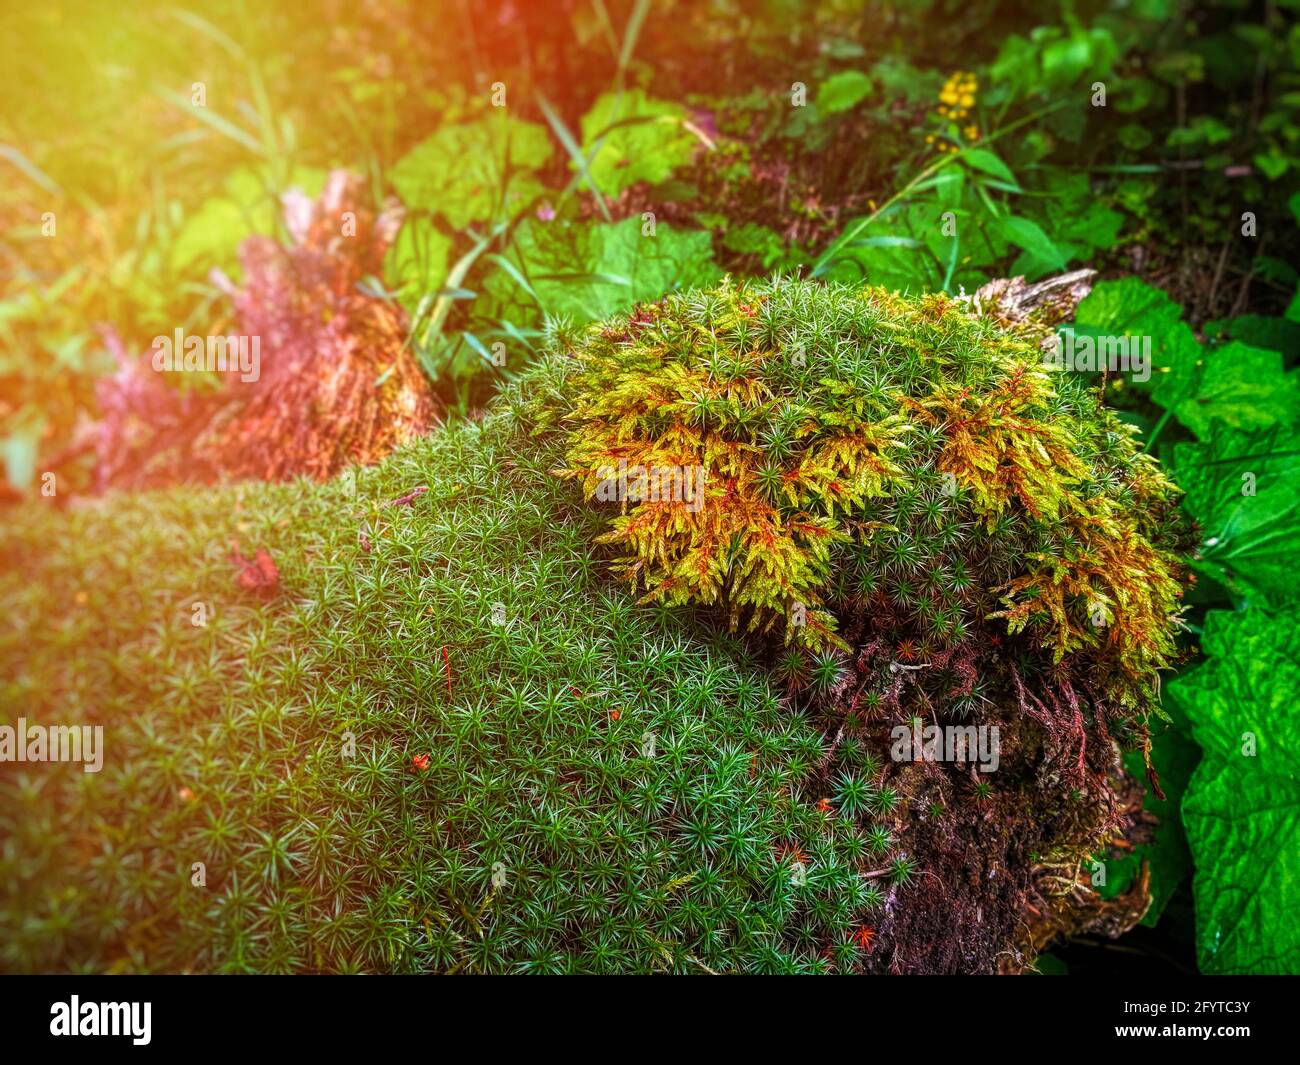 In natural conditions, moss on a rotten stump. Stock Photo